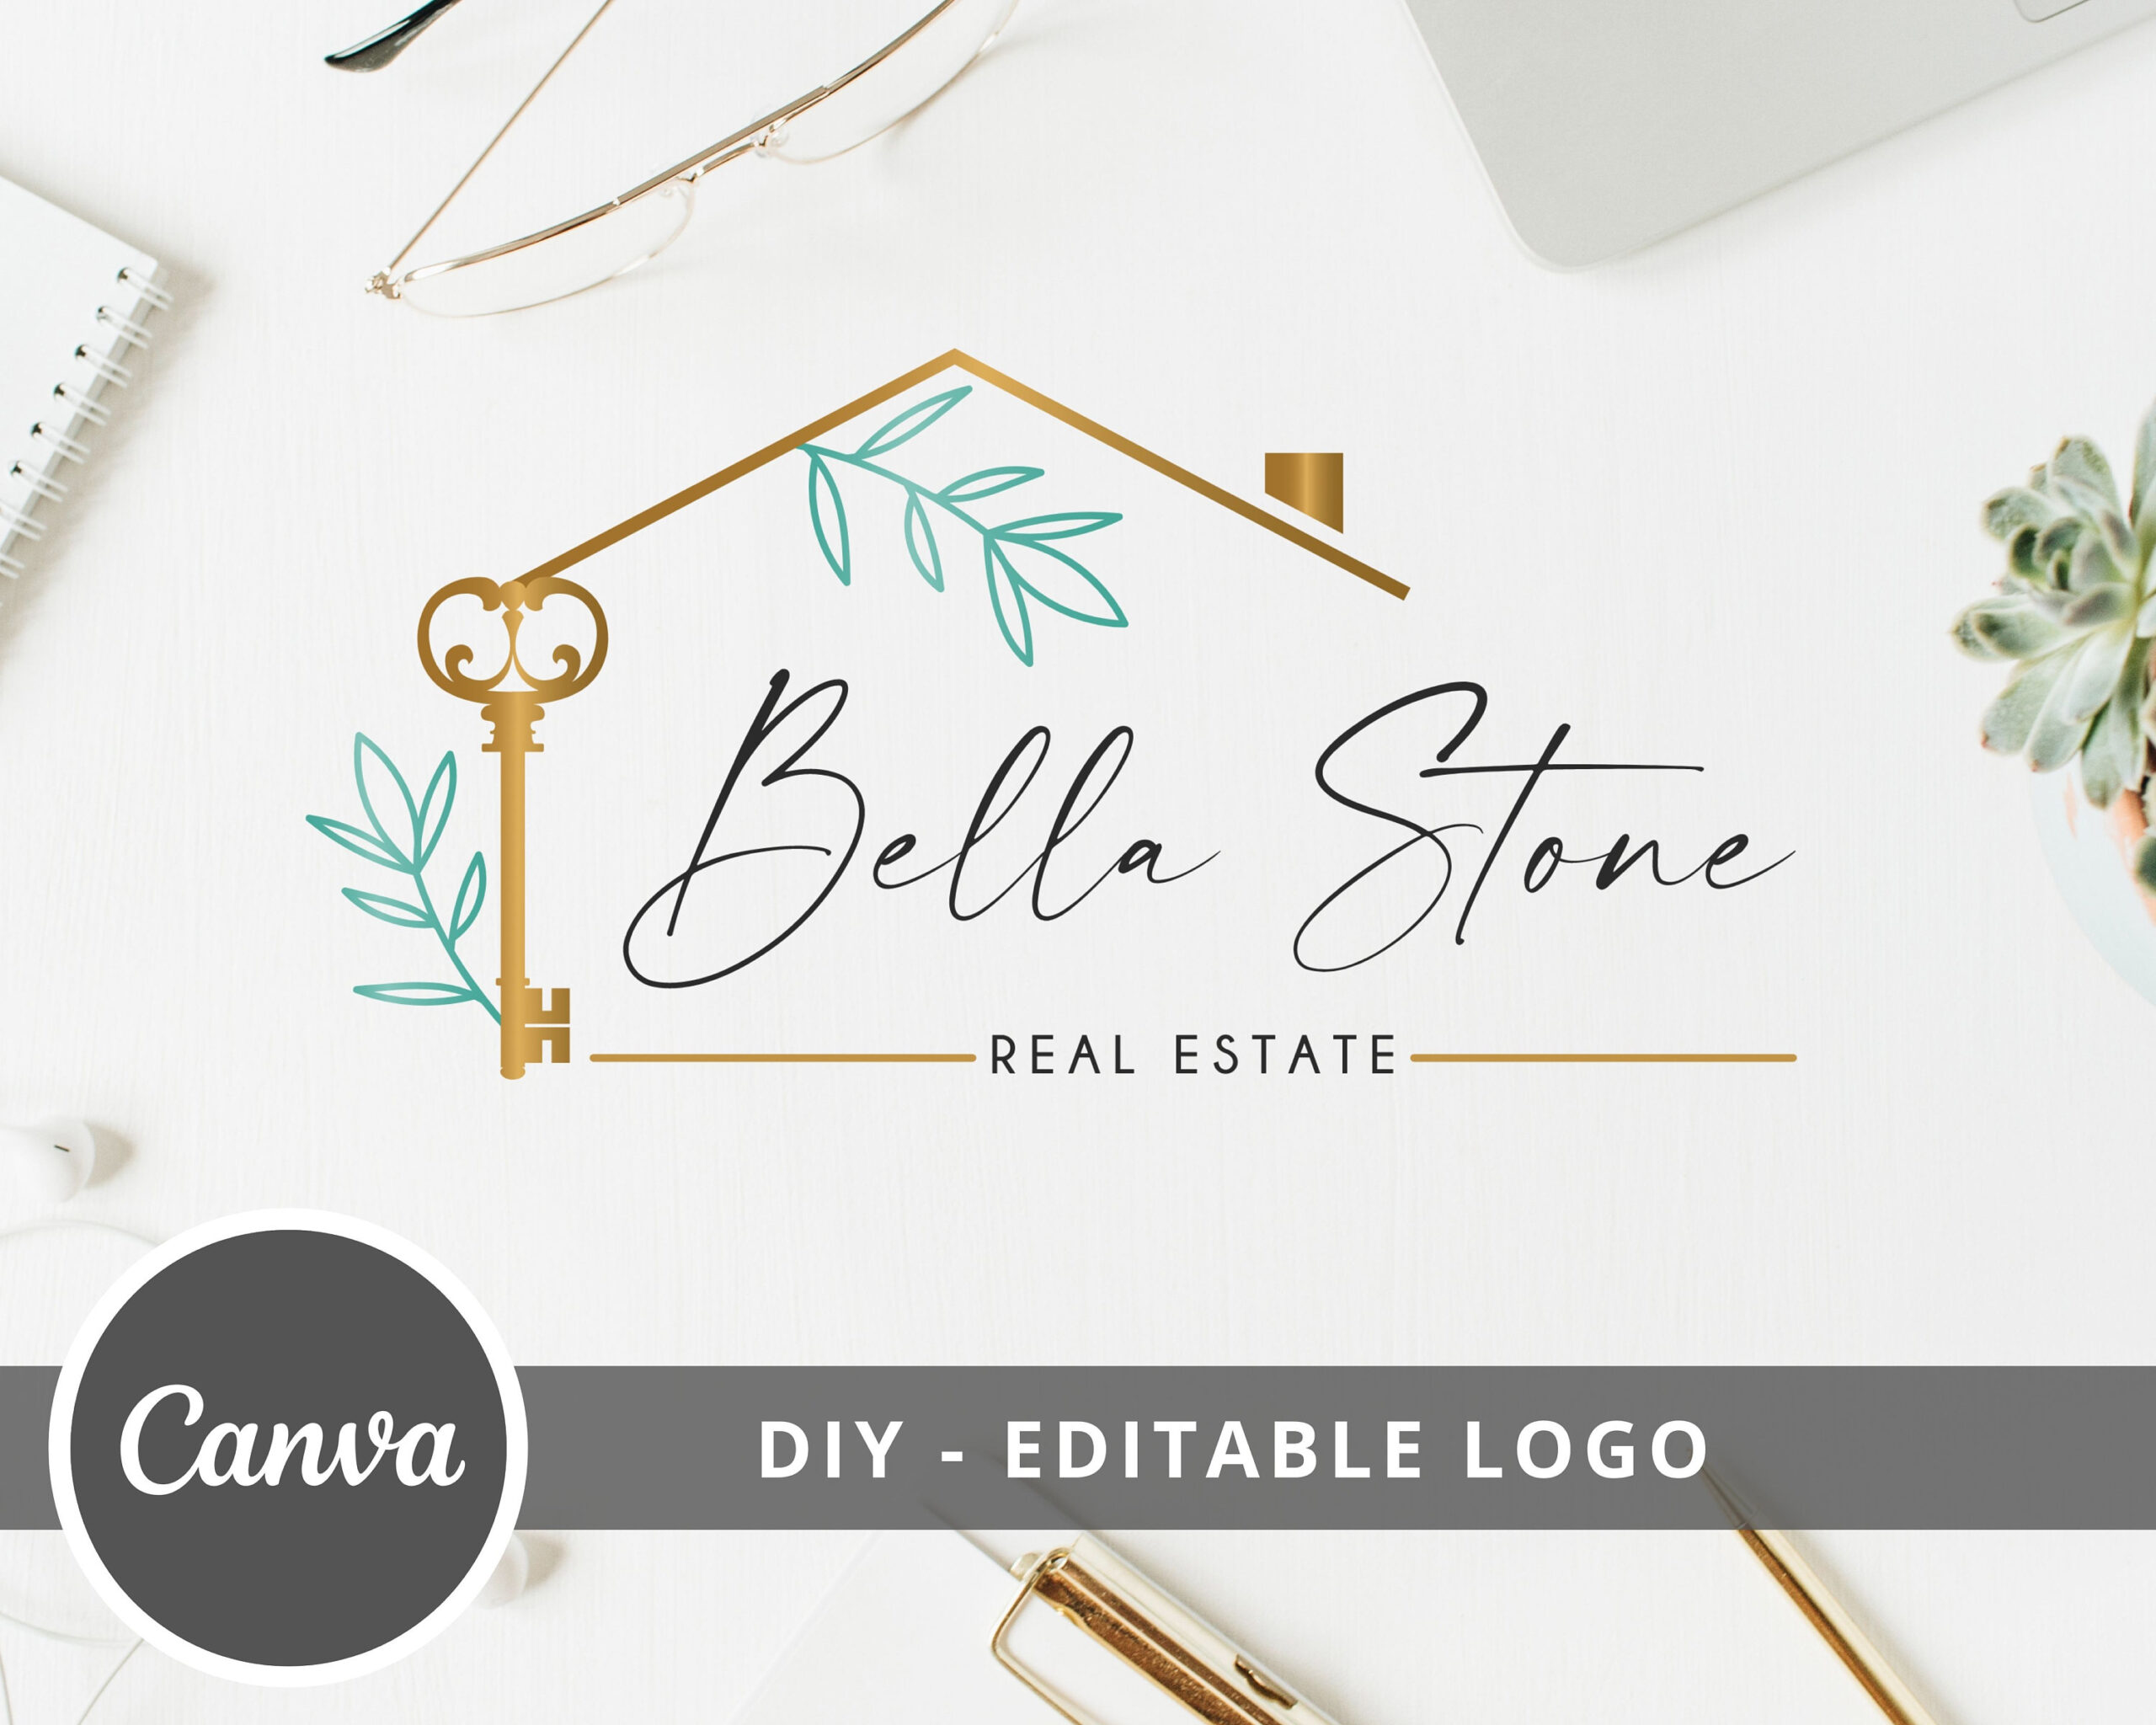 Editable Logo Template -  DIY Real Estate Logo Design - Canva Template - Gold and Teal House and Leaves - Instant Access -  Edit & Download